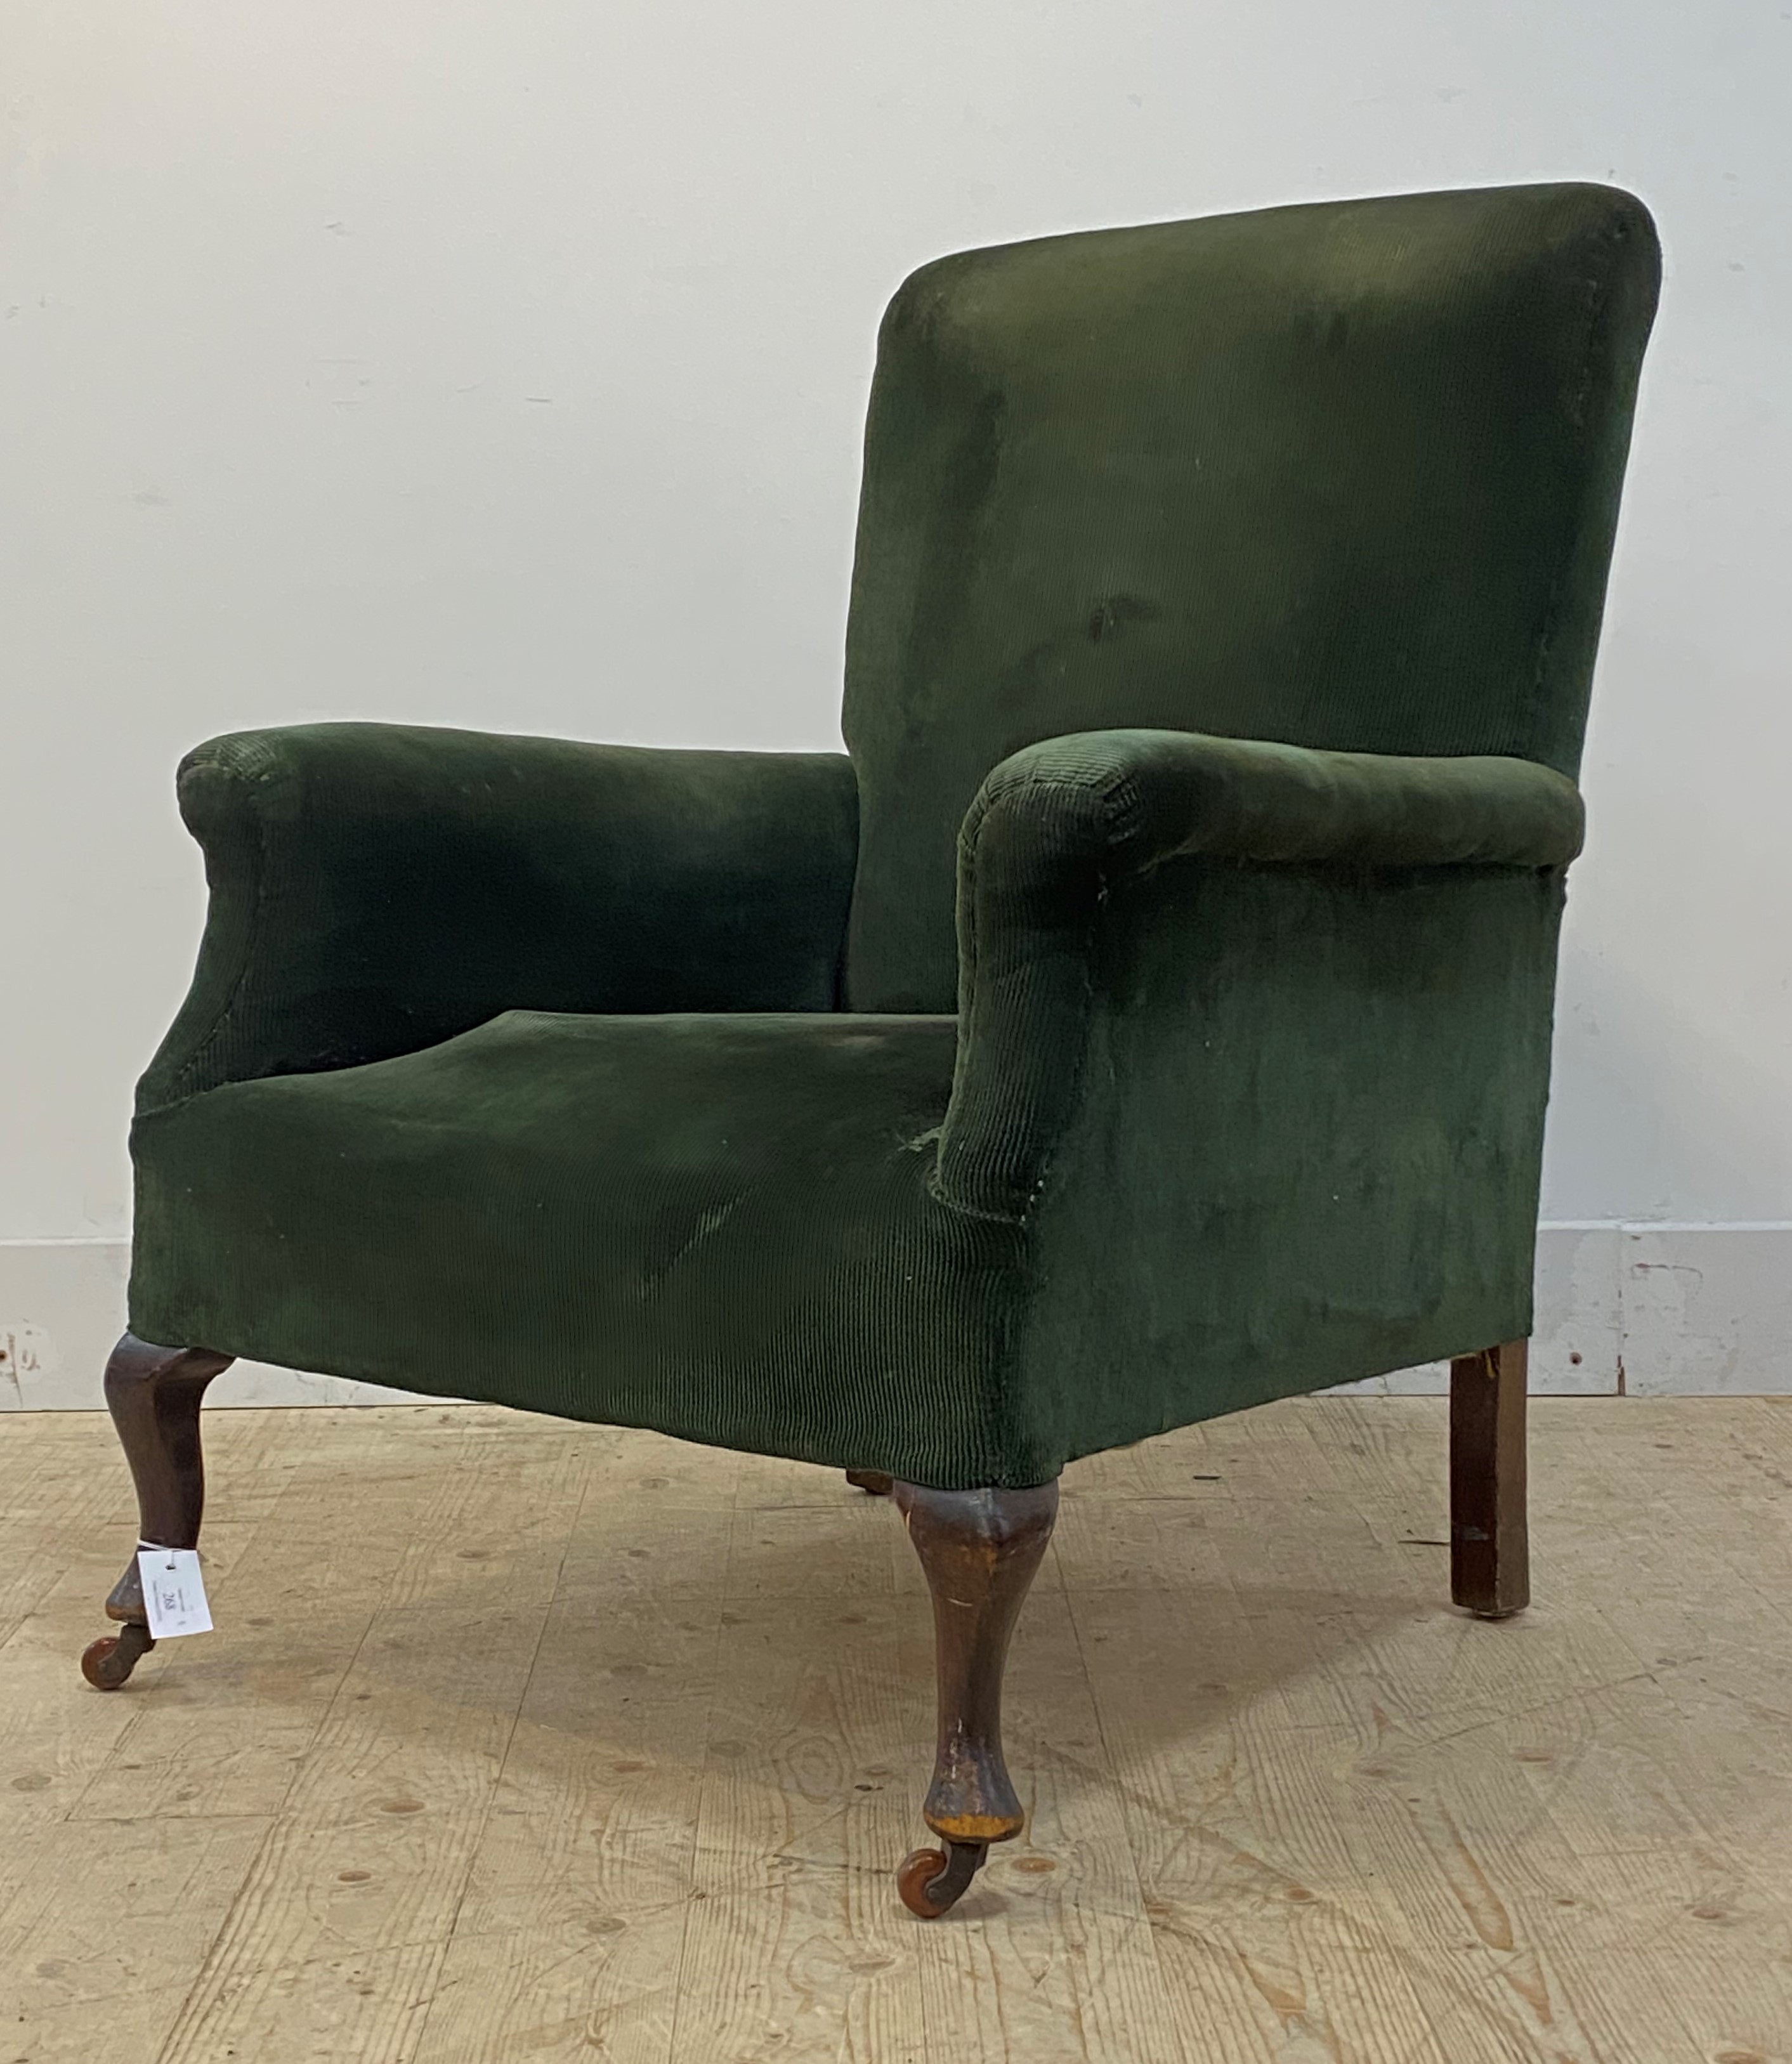 An early 20th century easy chair, upholstered in bottle green corduroy, raised on front cabriole